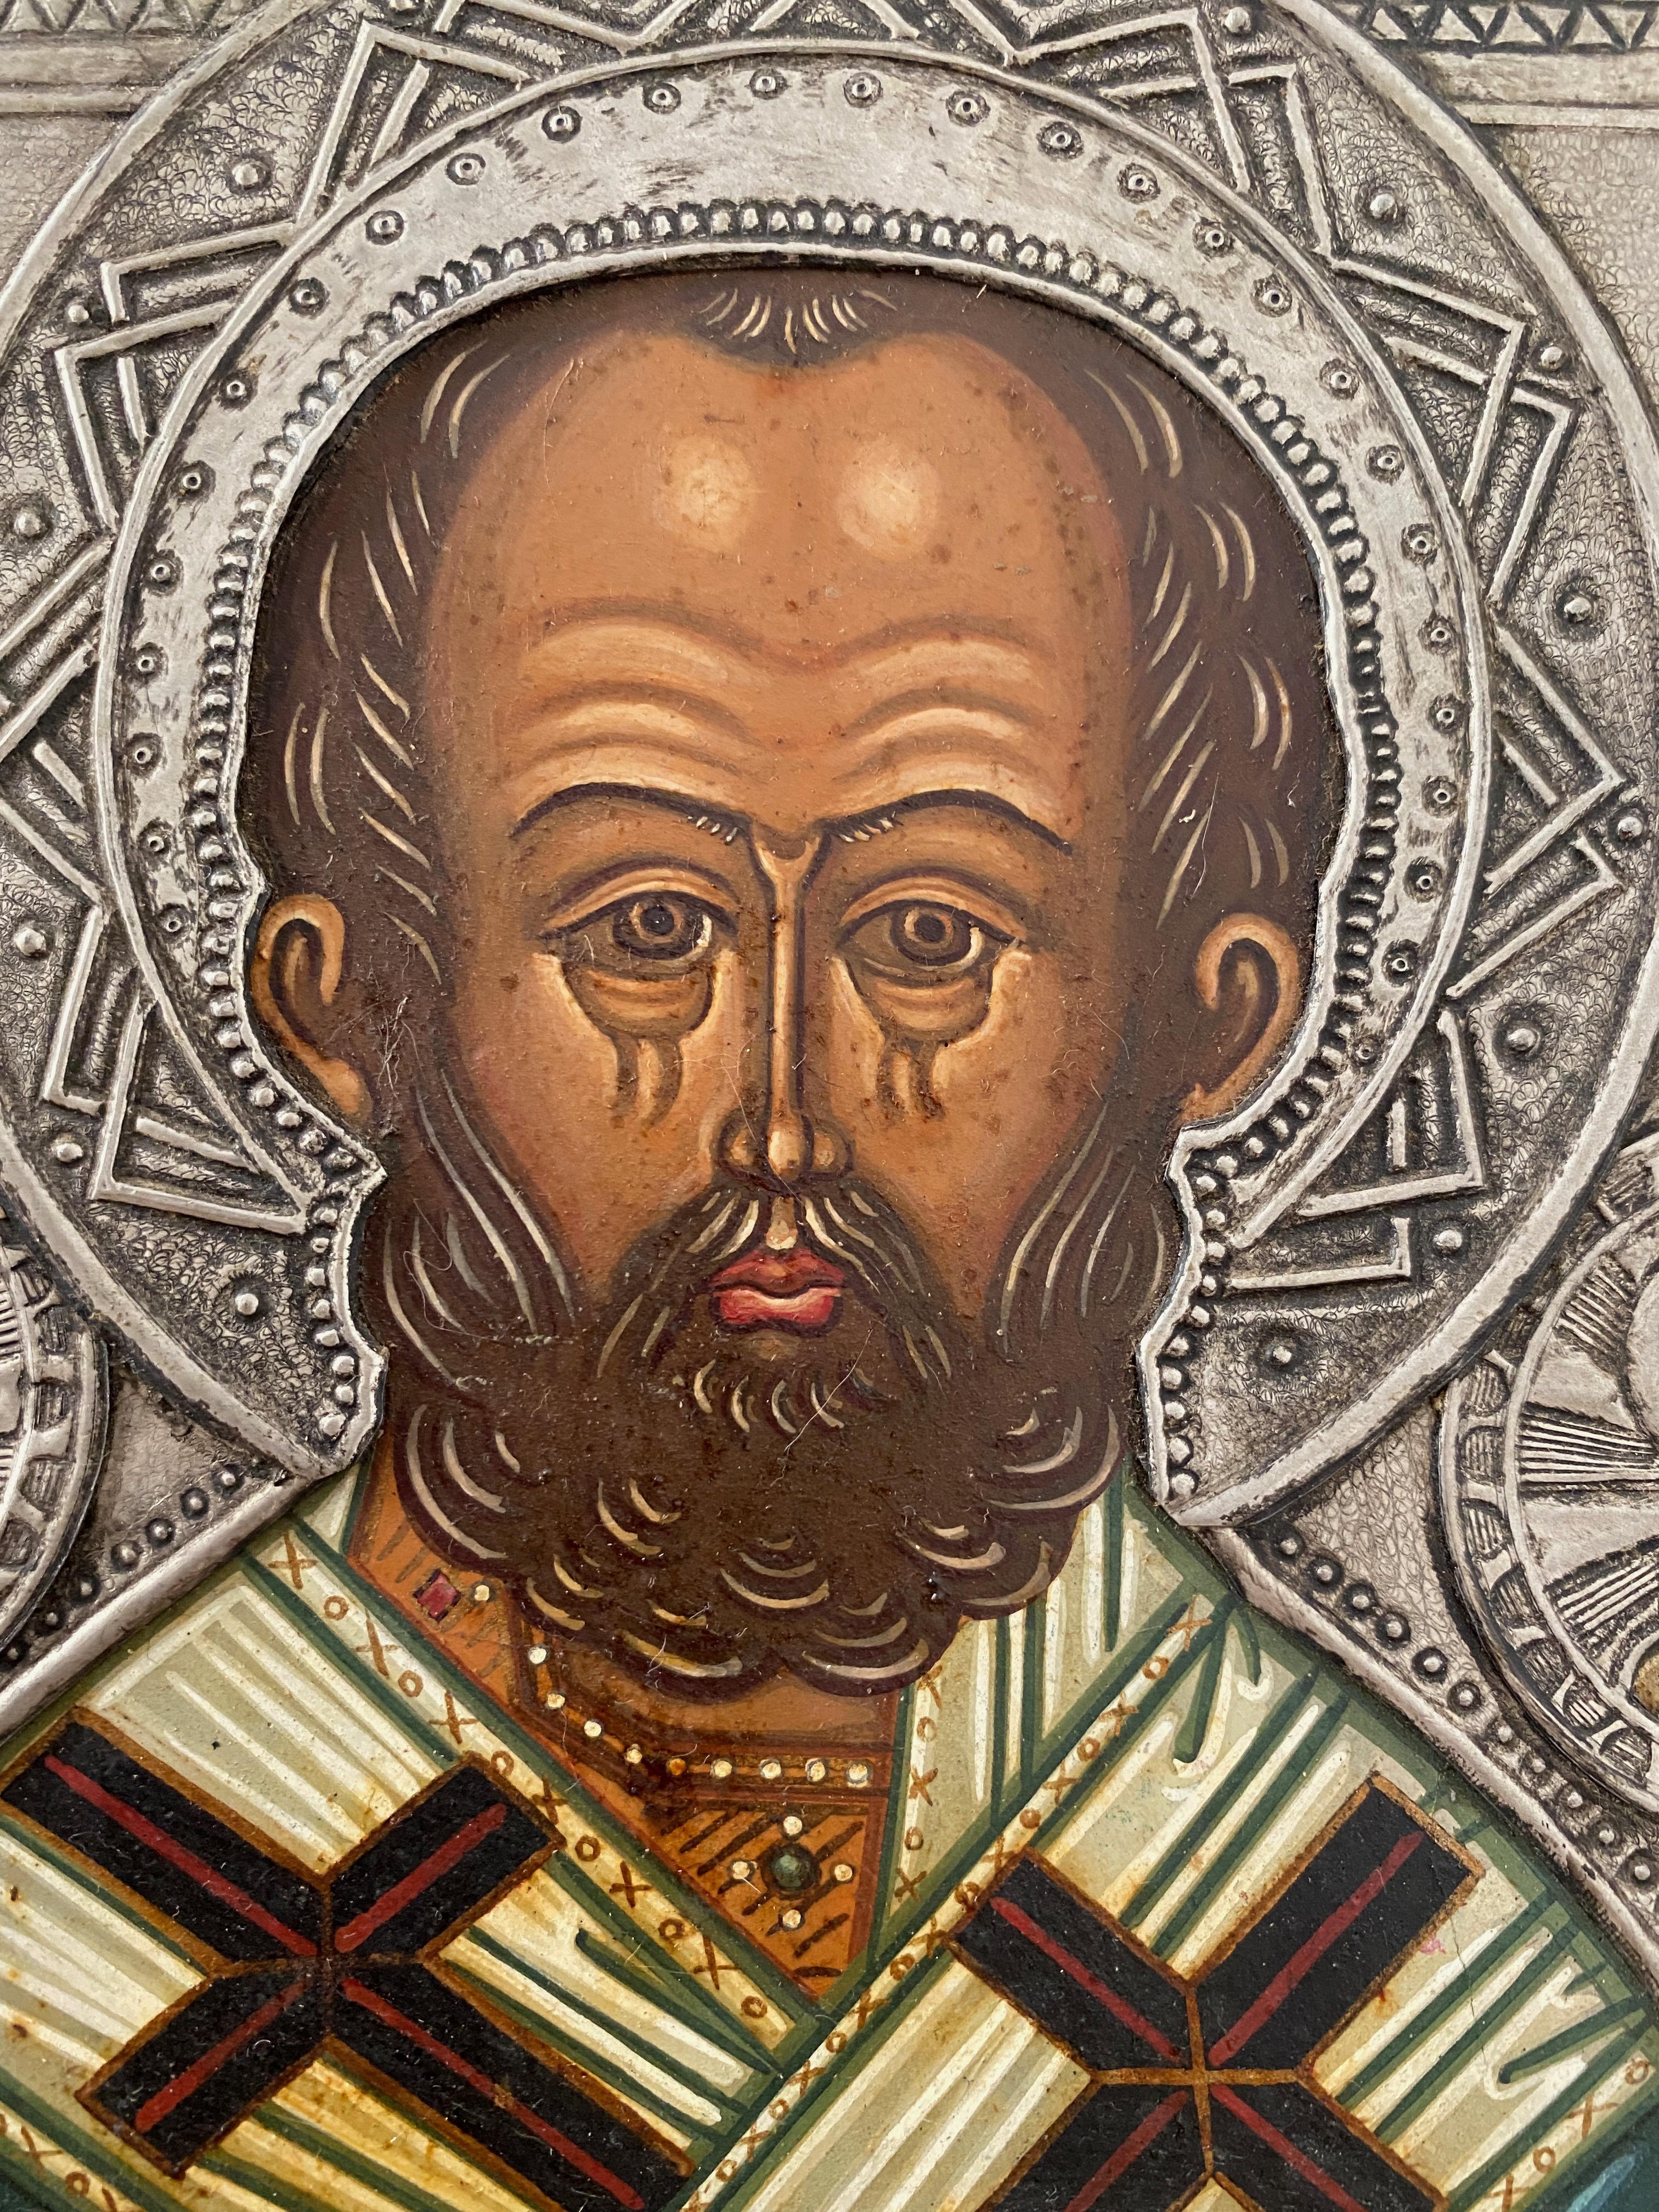 Saint Nicolas in the style of Russian icons of the 18th century. With Oklad - Painting by Oliver Samsinger